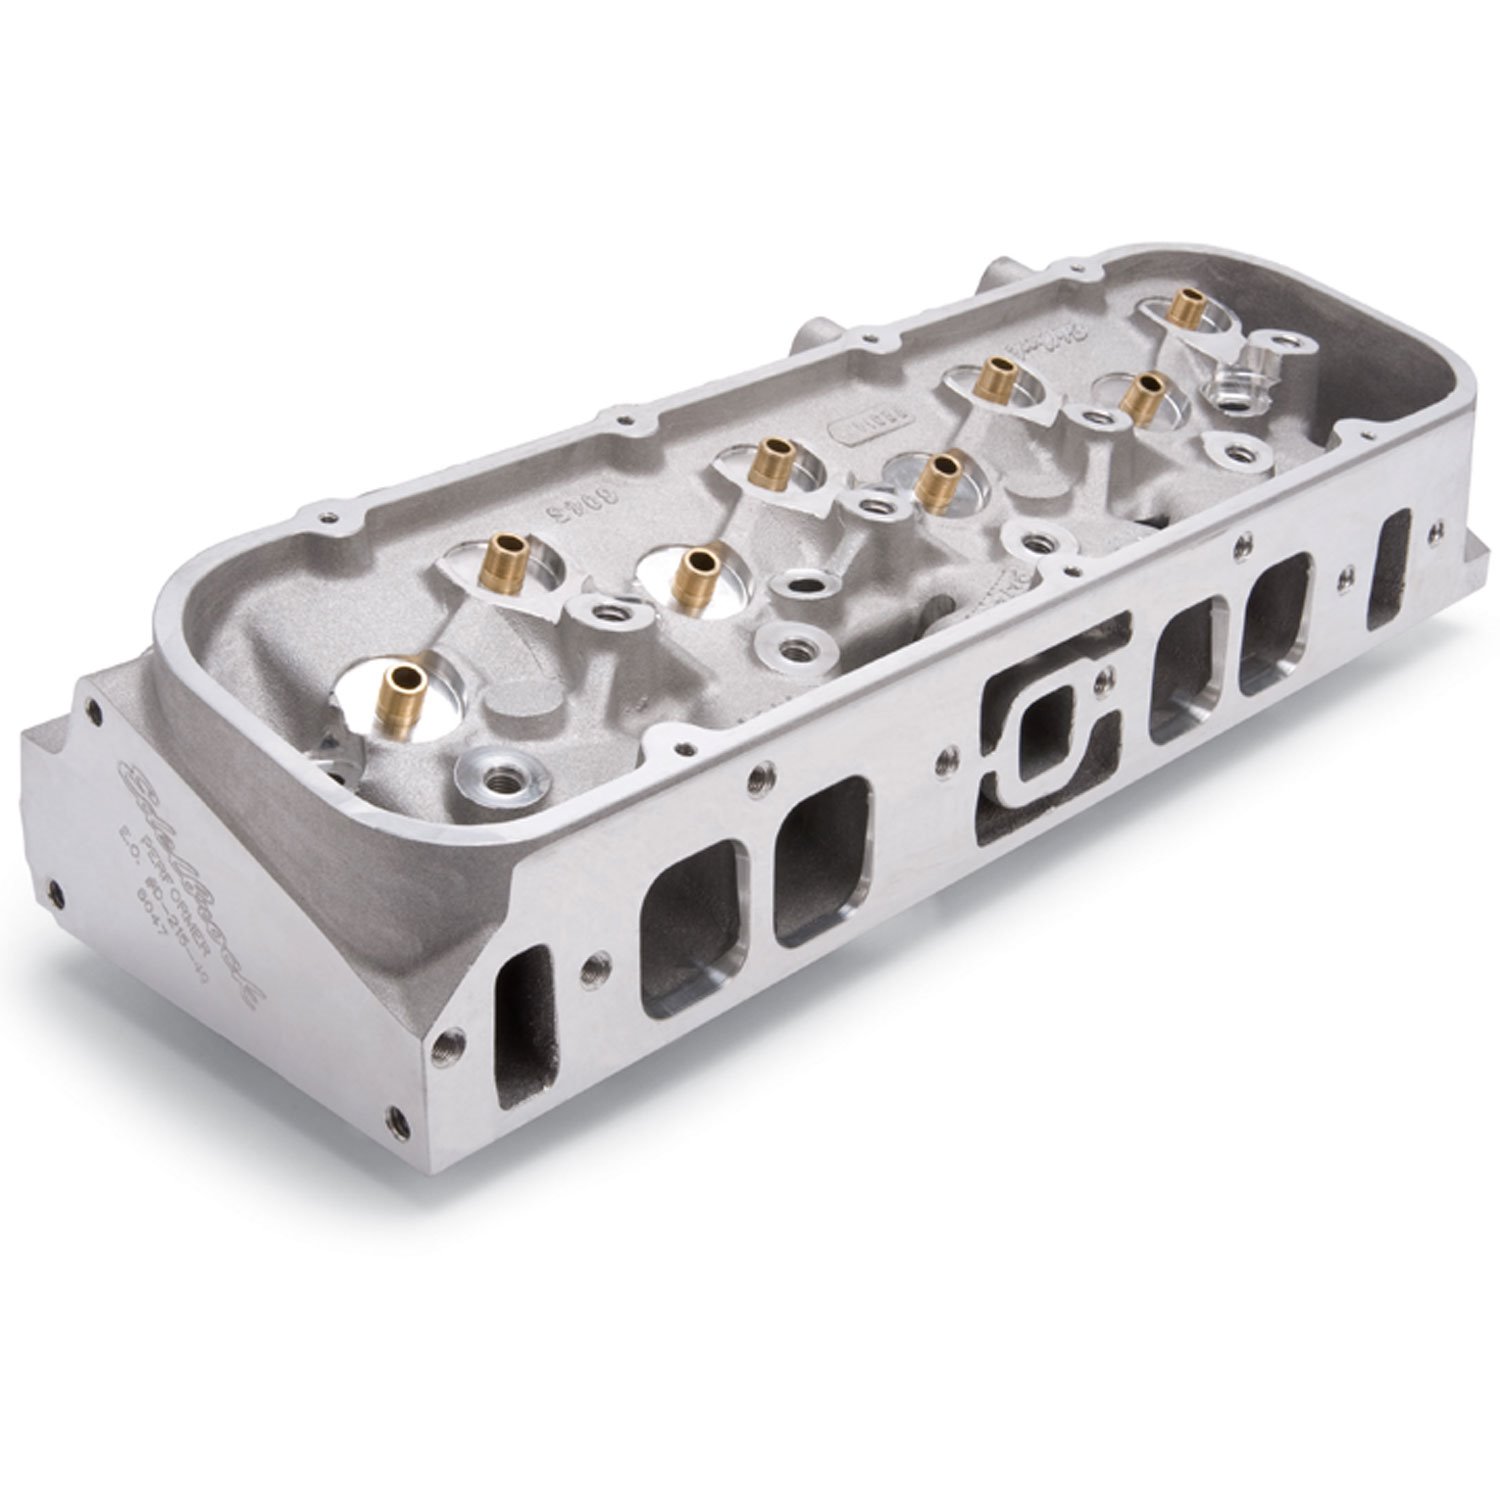 Performer RPM 454-O Oval Port Cylinder Head for Big Block Chevy